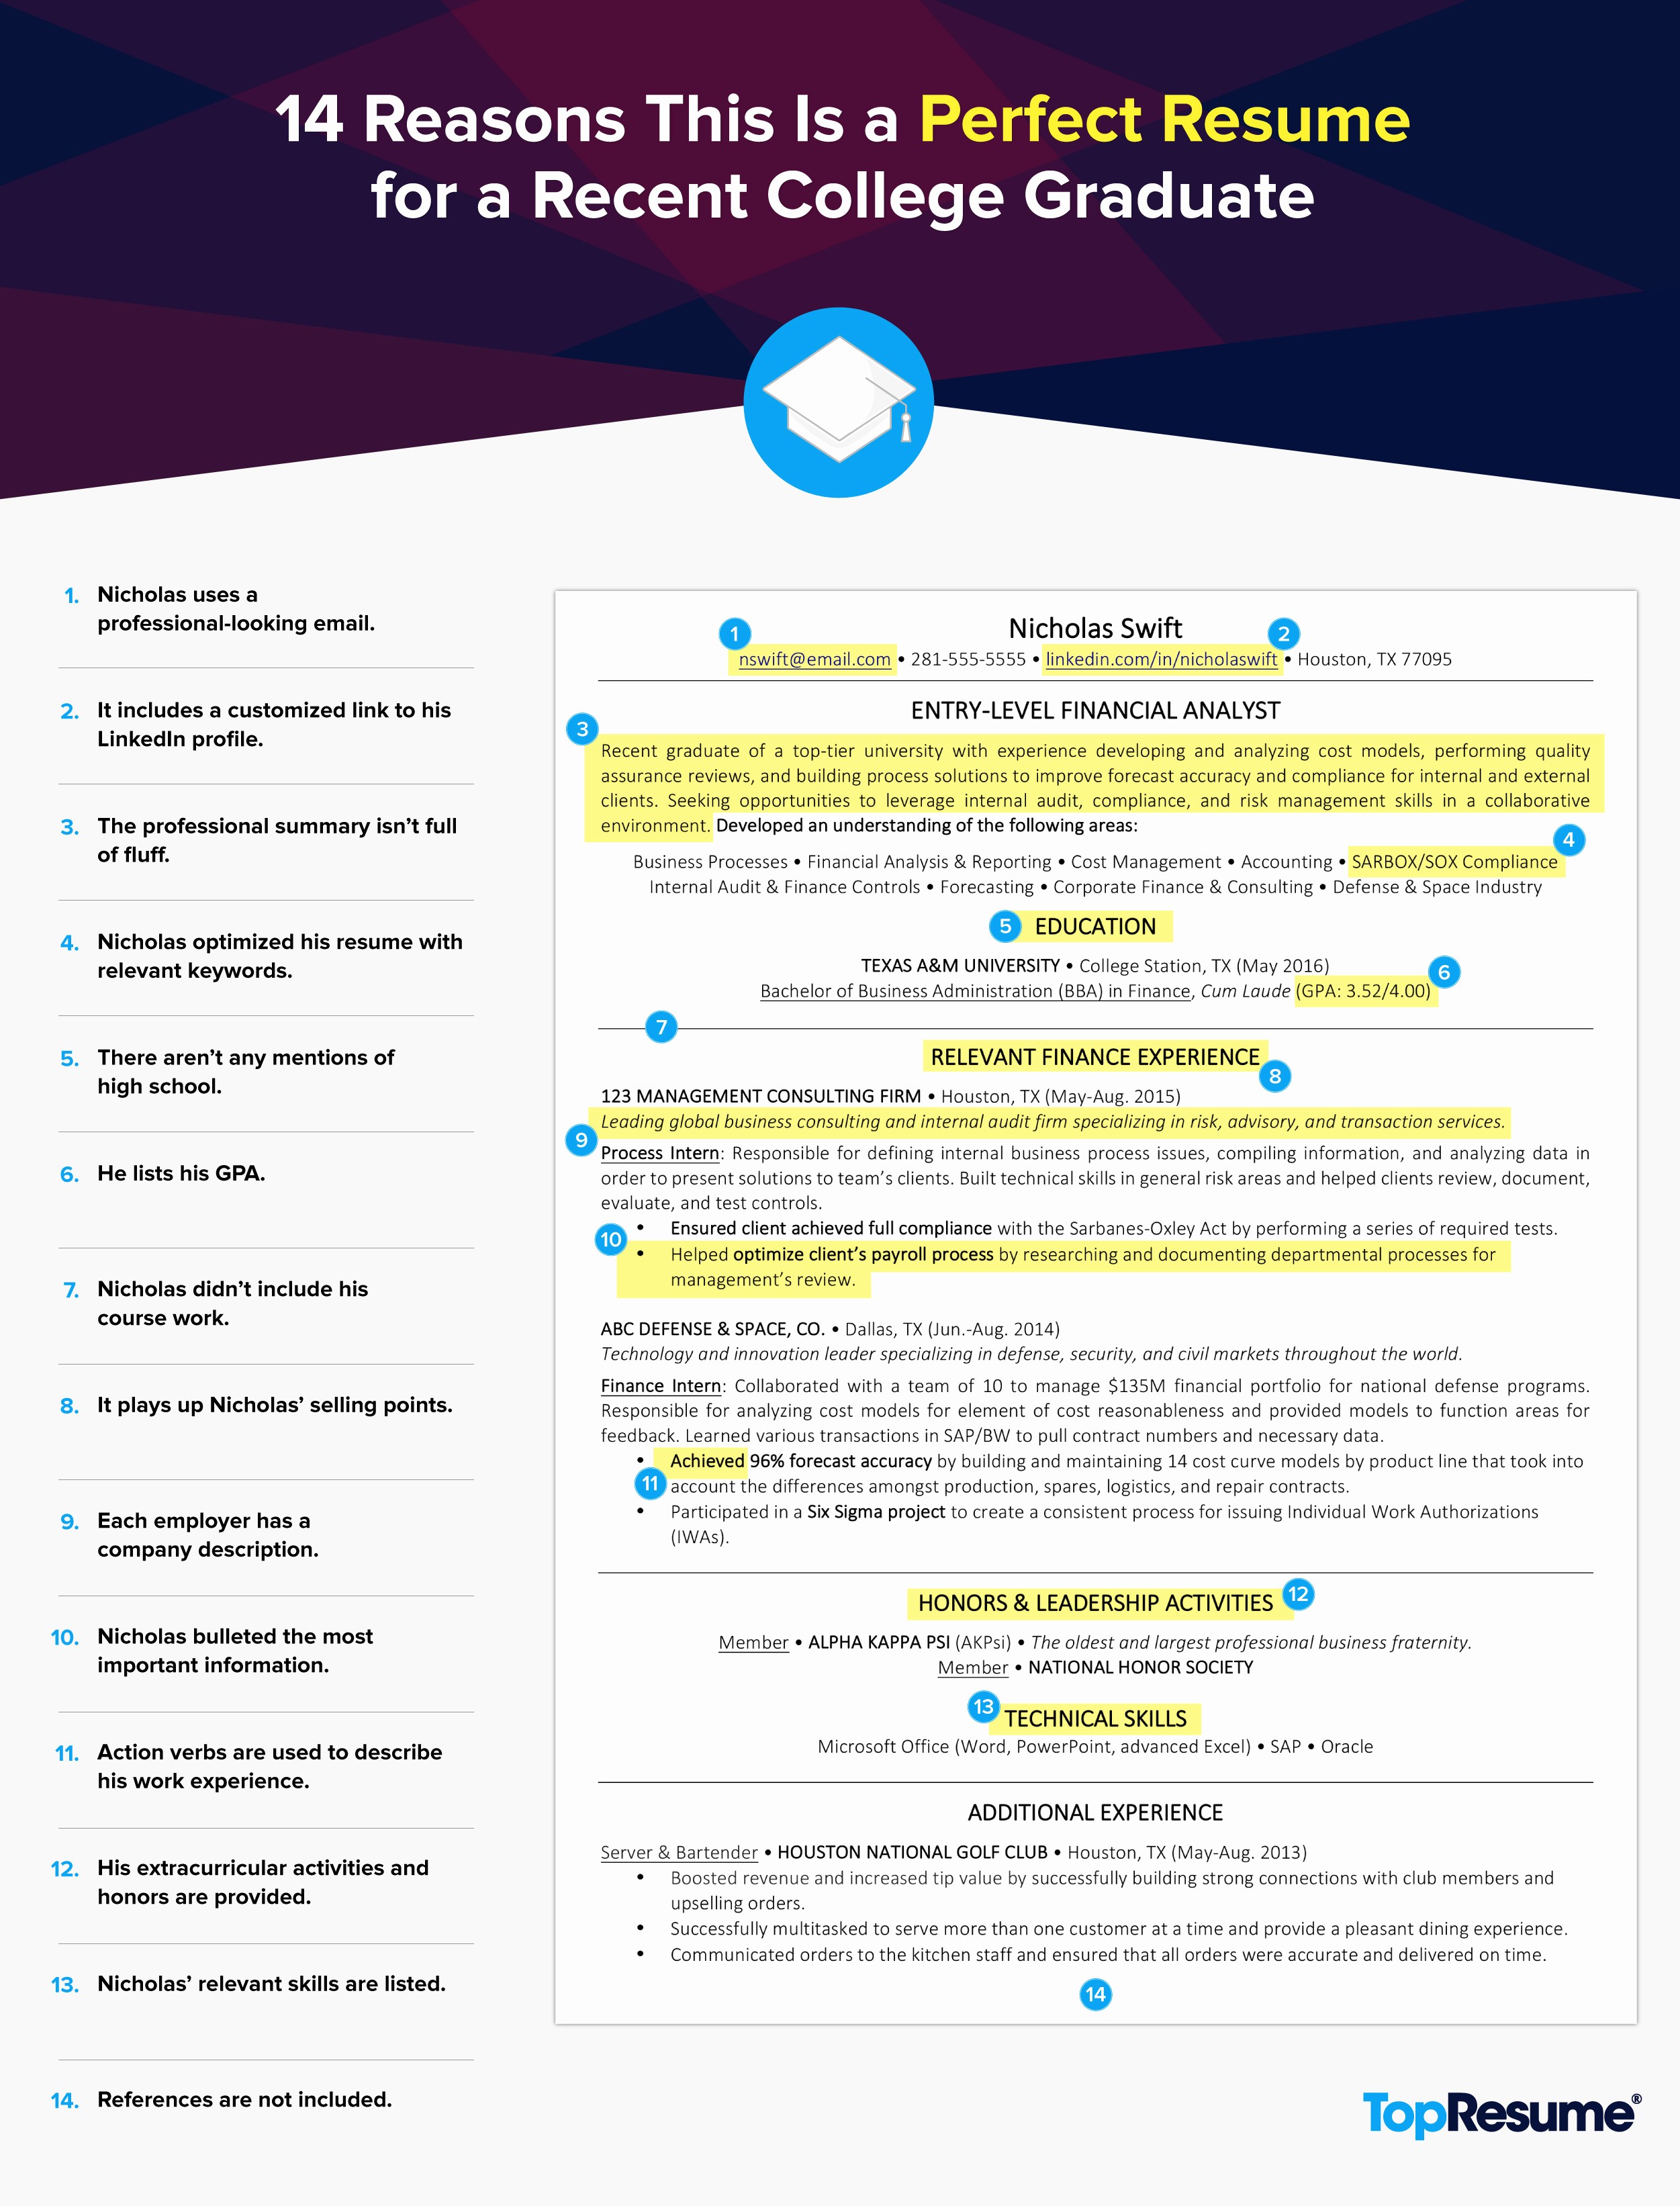 Resume for Recent College Grads Lovely 14 Reasons This is A Perfect Recent College Graduate